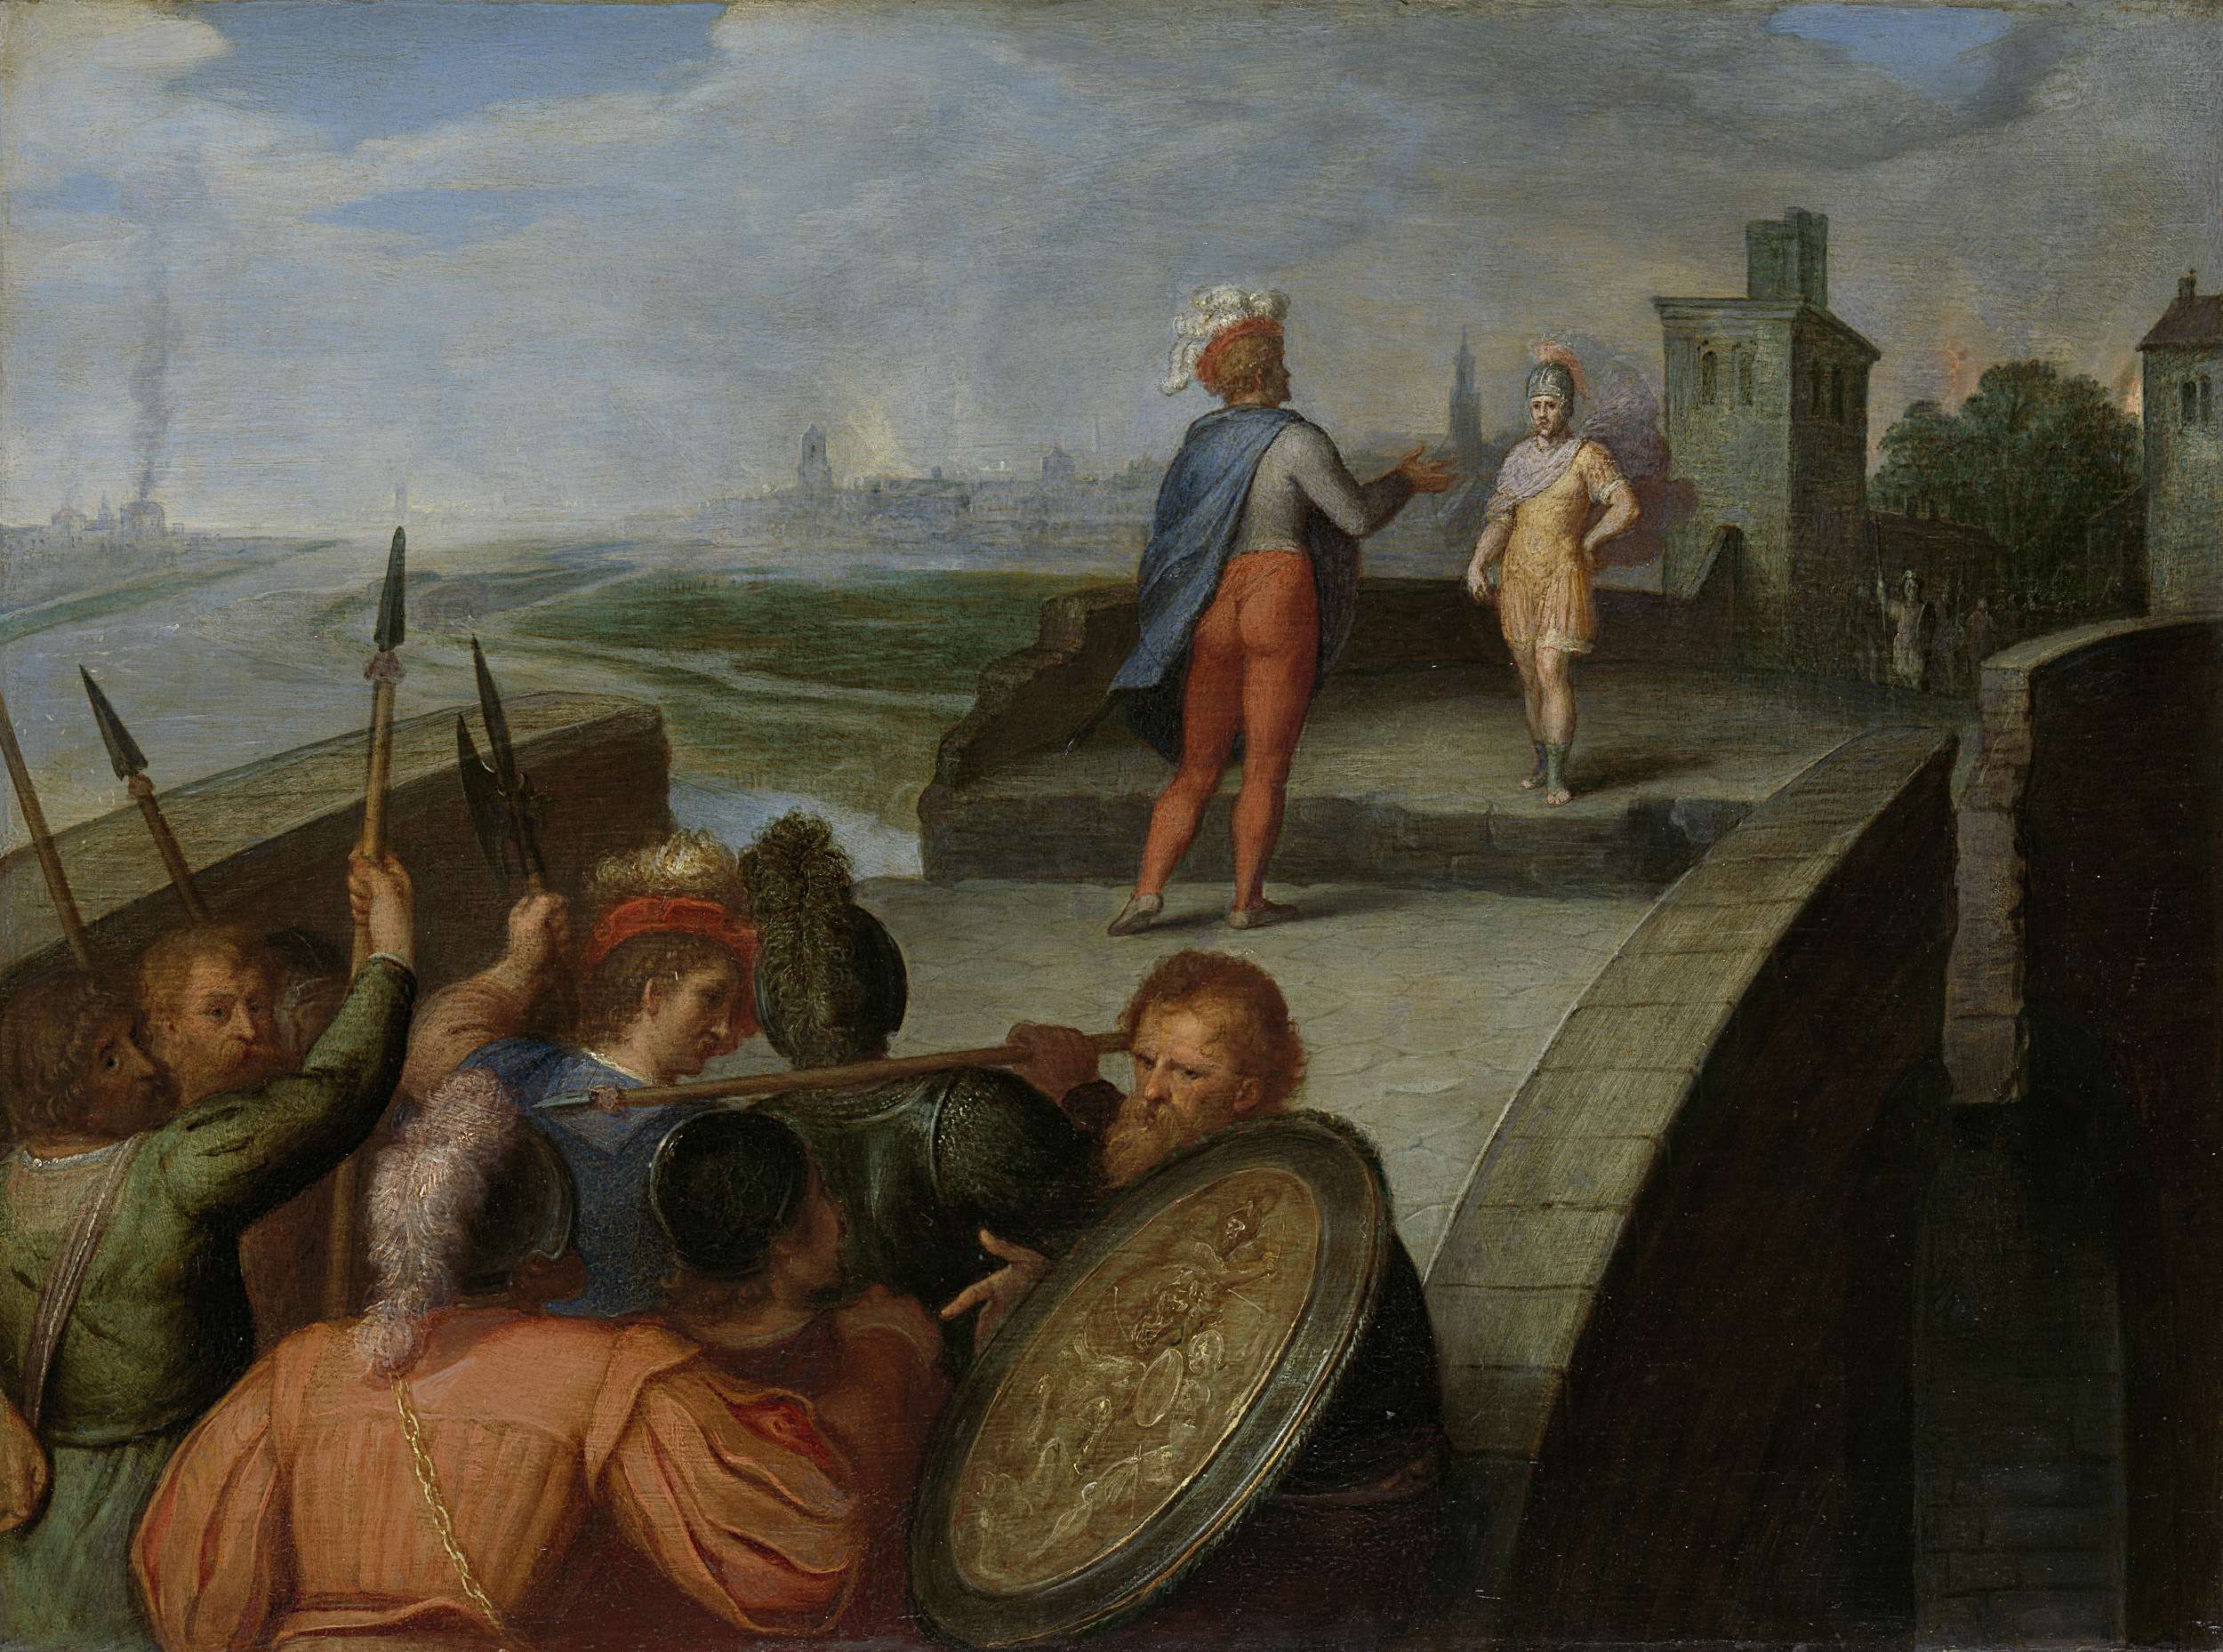 The Peace Negotiations Between Claudius Civilis and the Roman Captain Cerealis by Otto van Veen, 1600-1613